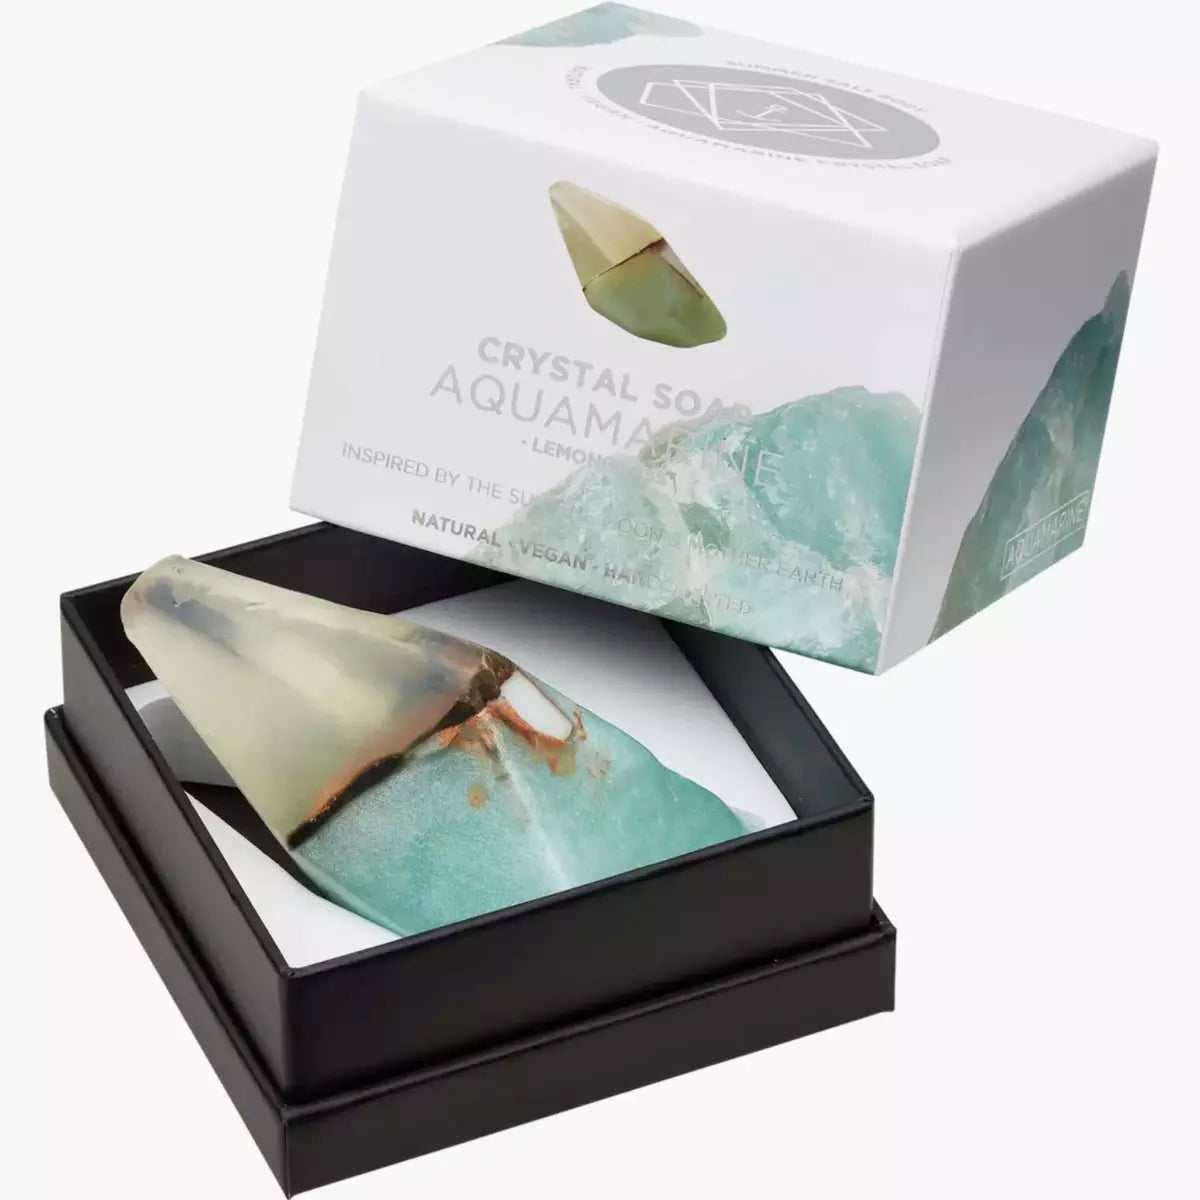 This elegant Summer Salt Body crystal soap comes in a luxurious box, showcasing its beautiful Aquamarine stone. Dive into the soothing world of this Crystal Soap - AQUAMARINE - Lemongrass and experience the refreshing touch of aqua.